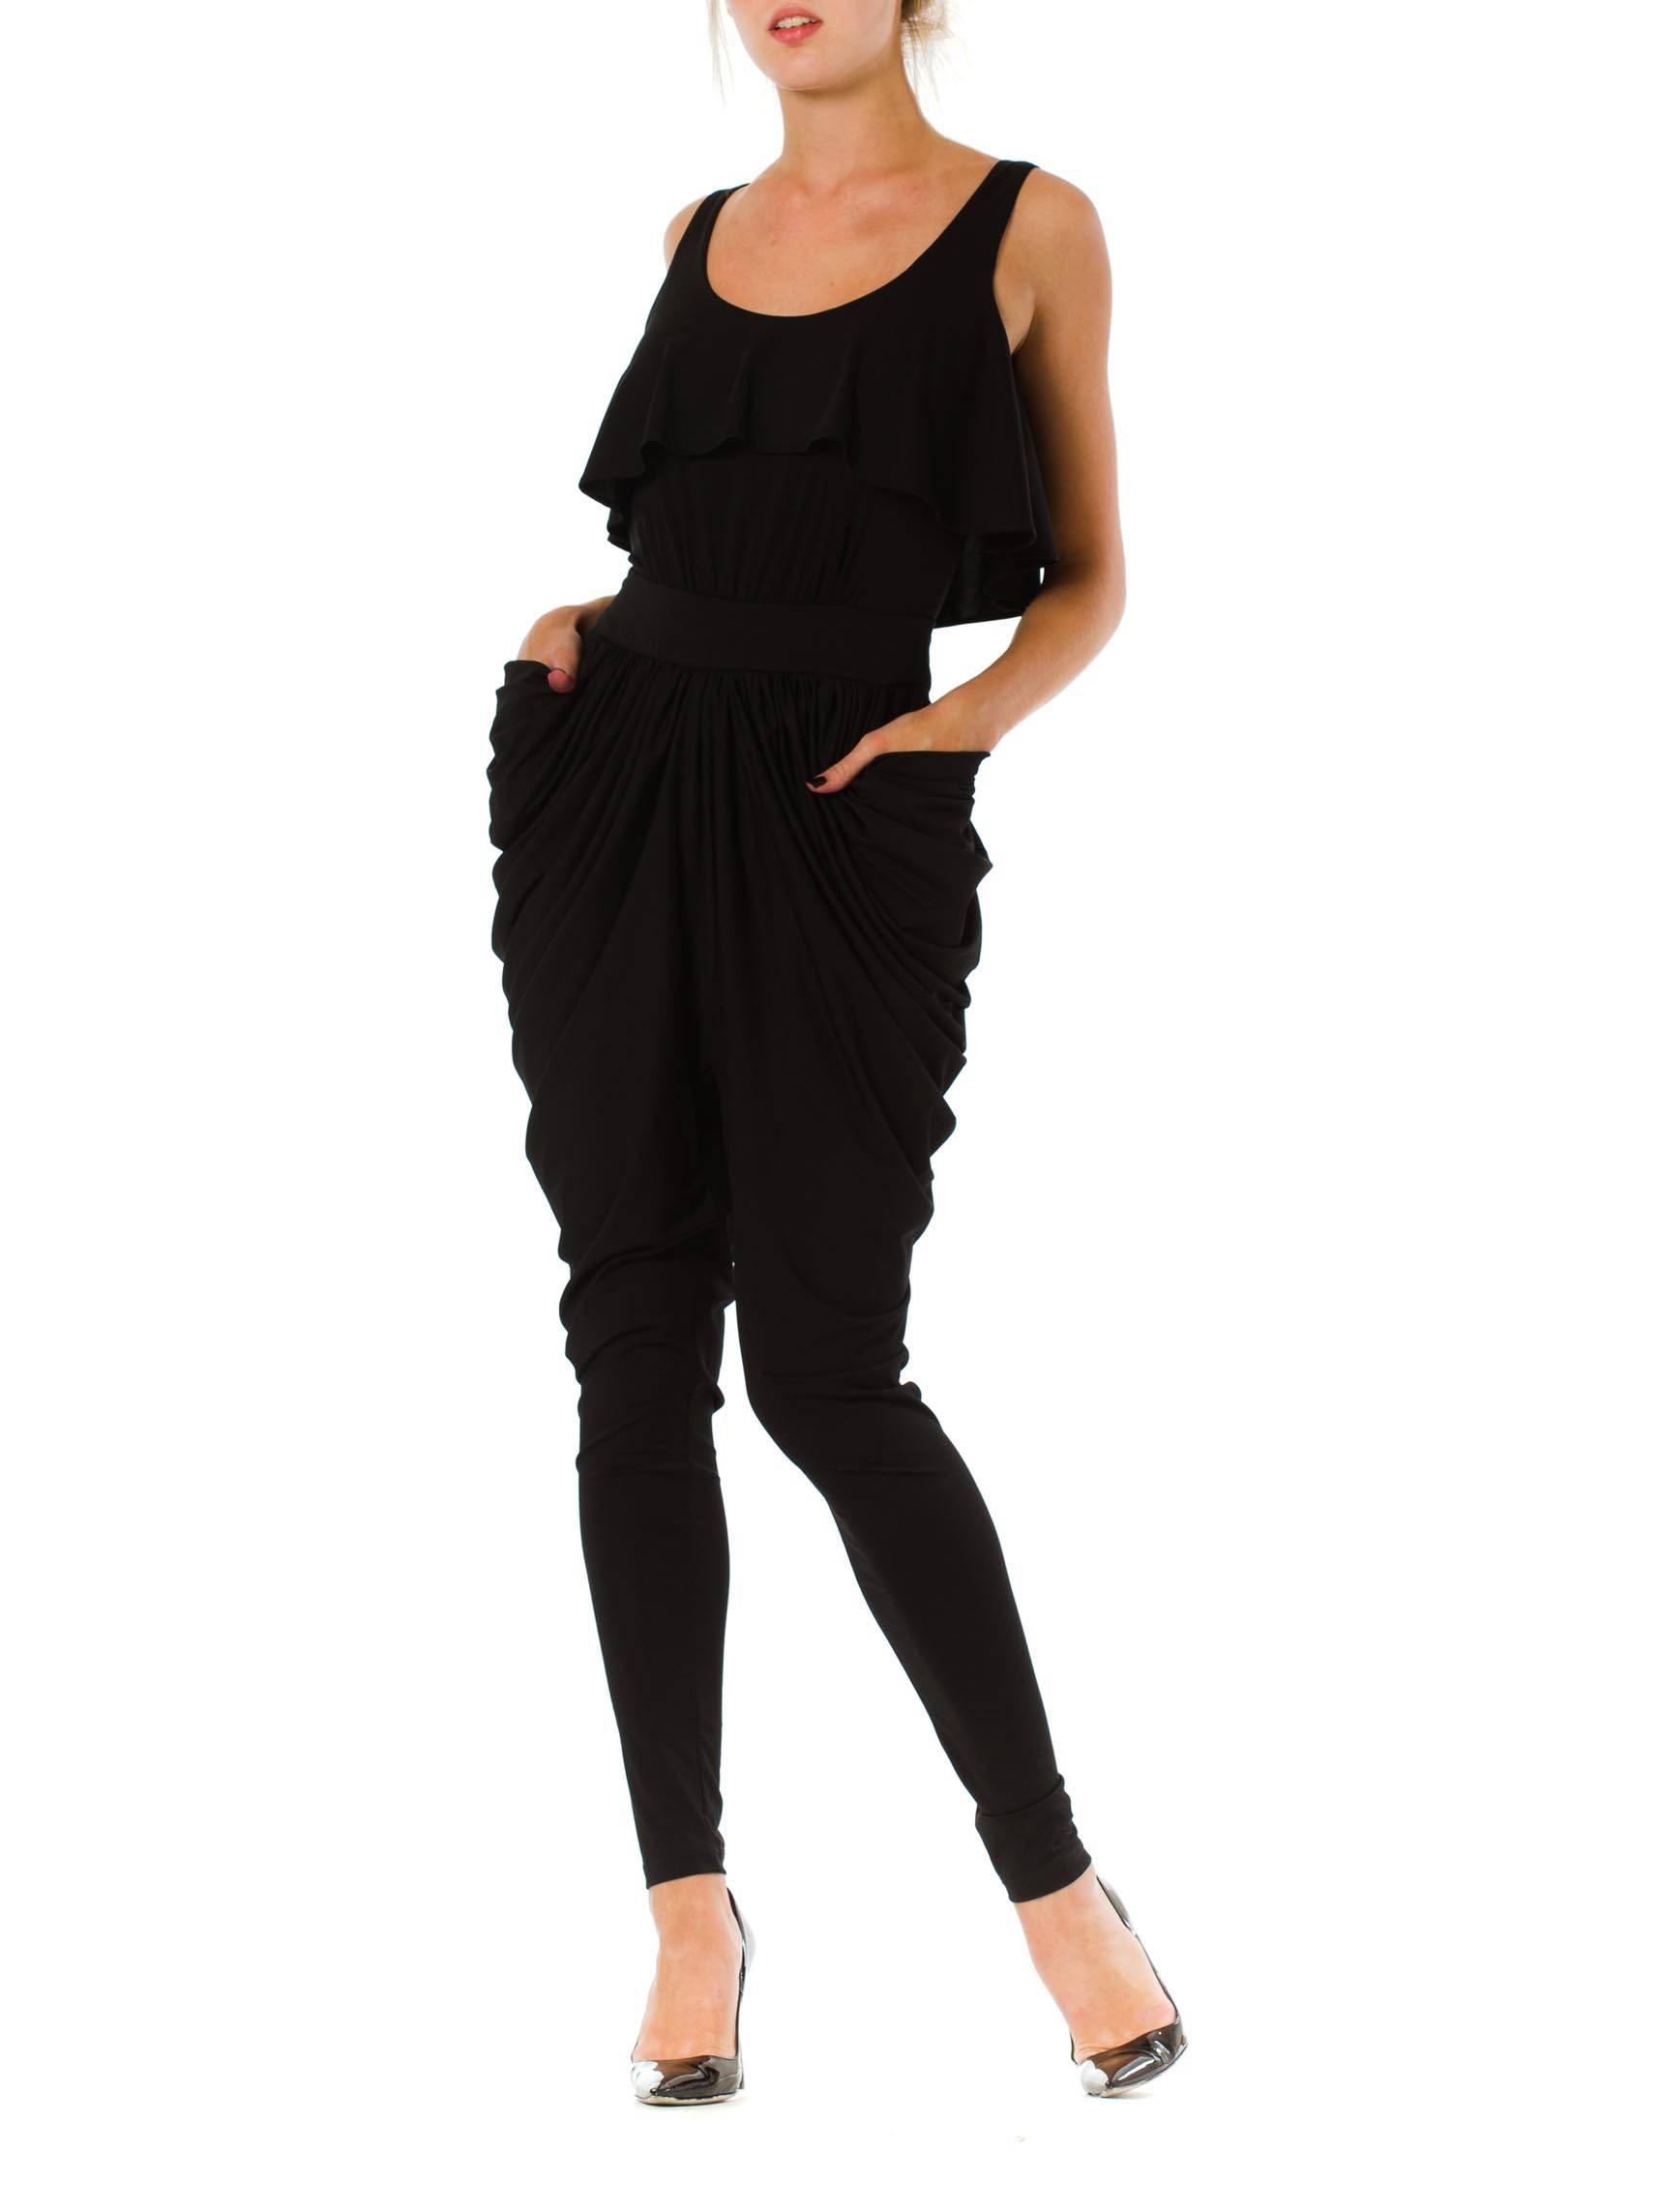 This gathered jumpsuit is an avant-garde number by famed designer Alexander McQueen. The hourglass-shaped garment is anchored by its wide, smooth waistband, from which the heavily gathered legging portion extends out over the hips. The voluminous